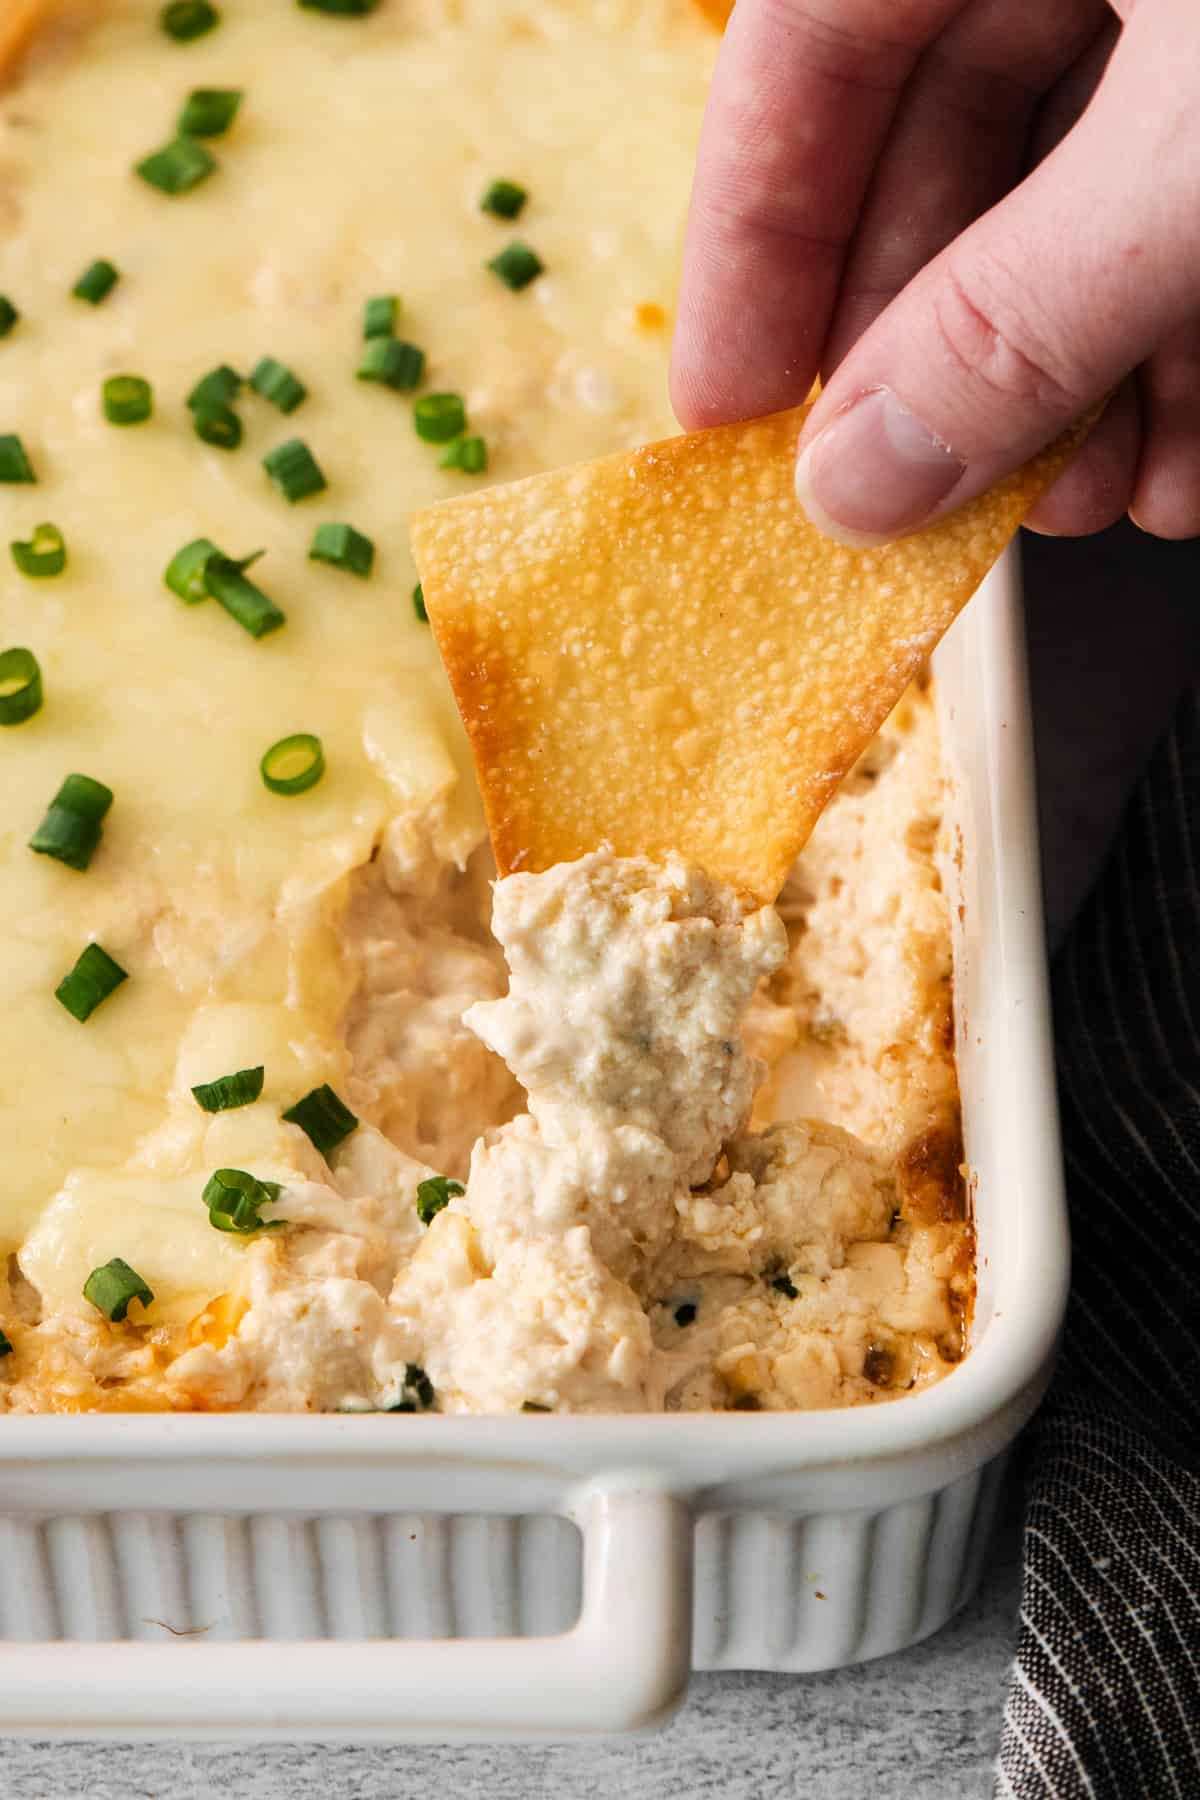 a hand dipping into a dish of chicken dip.